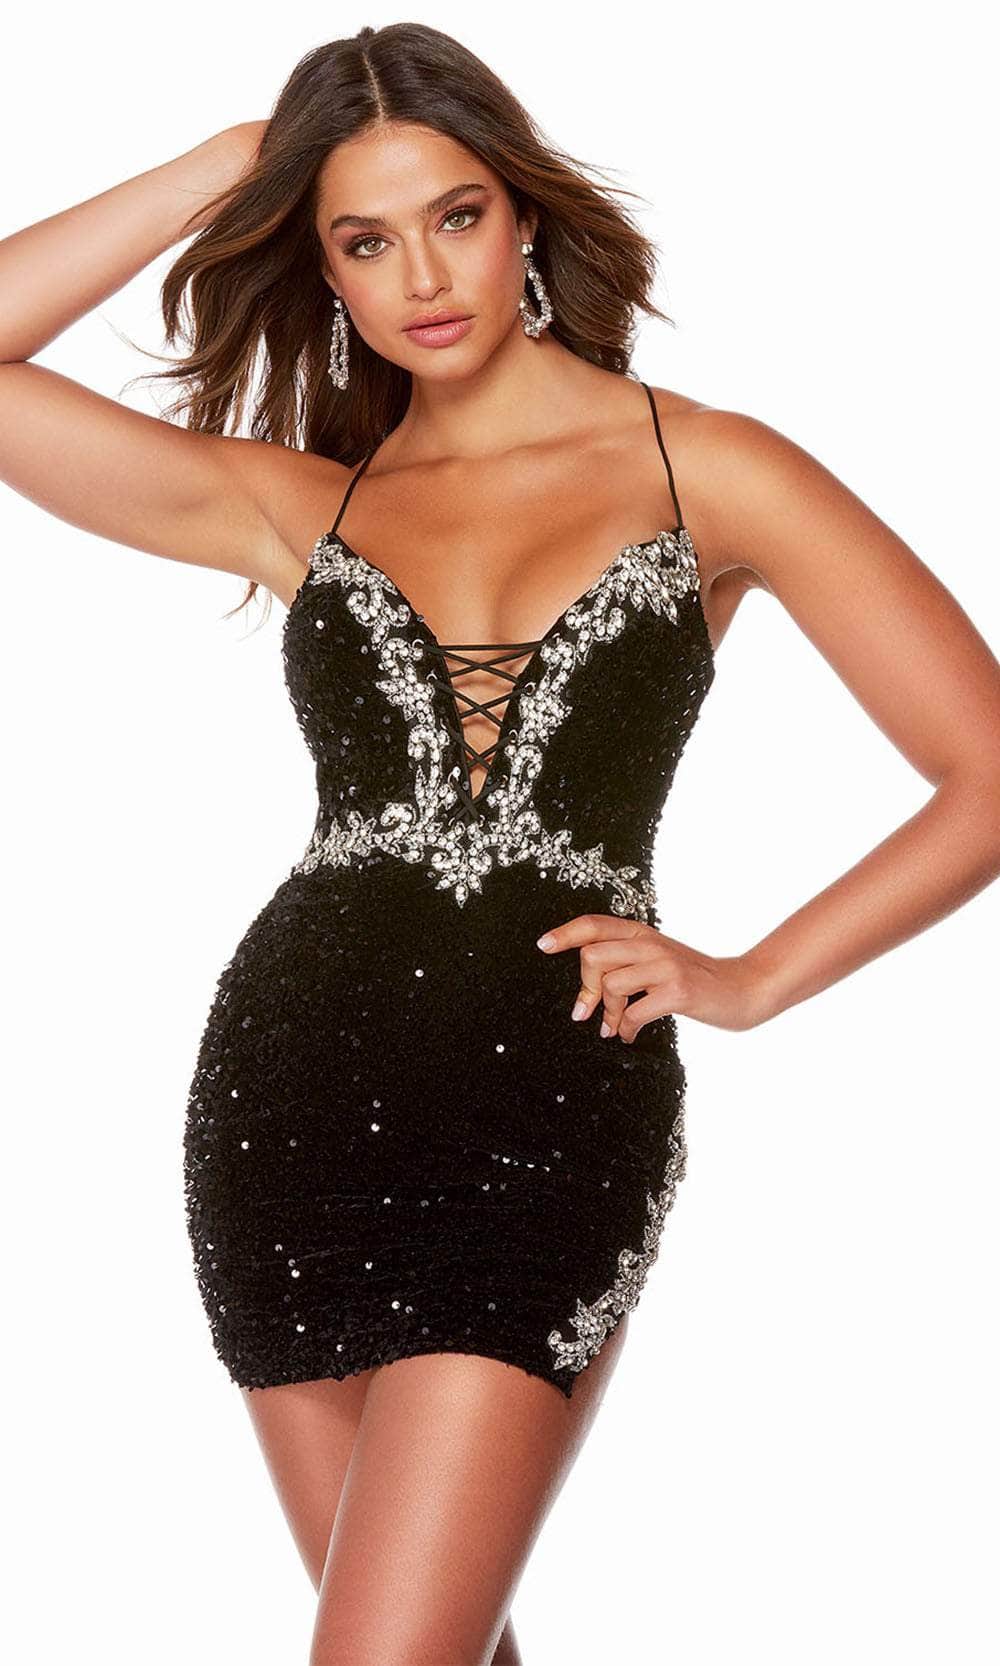 Image of Alyce Paris 4797 - Plunging Sparkly Cocktail Dress